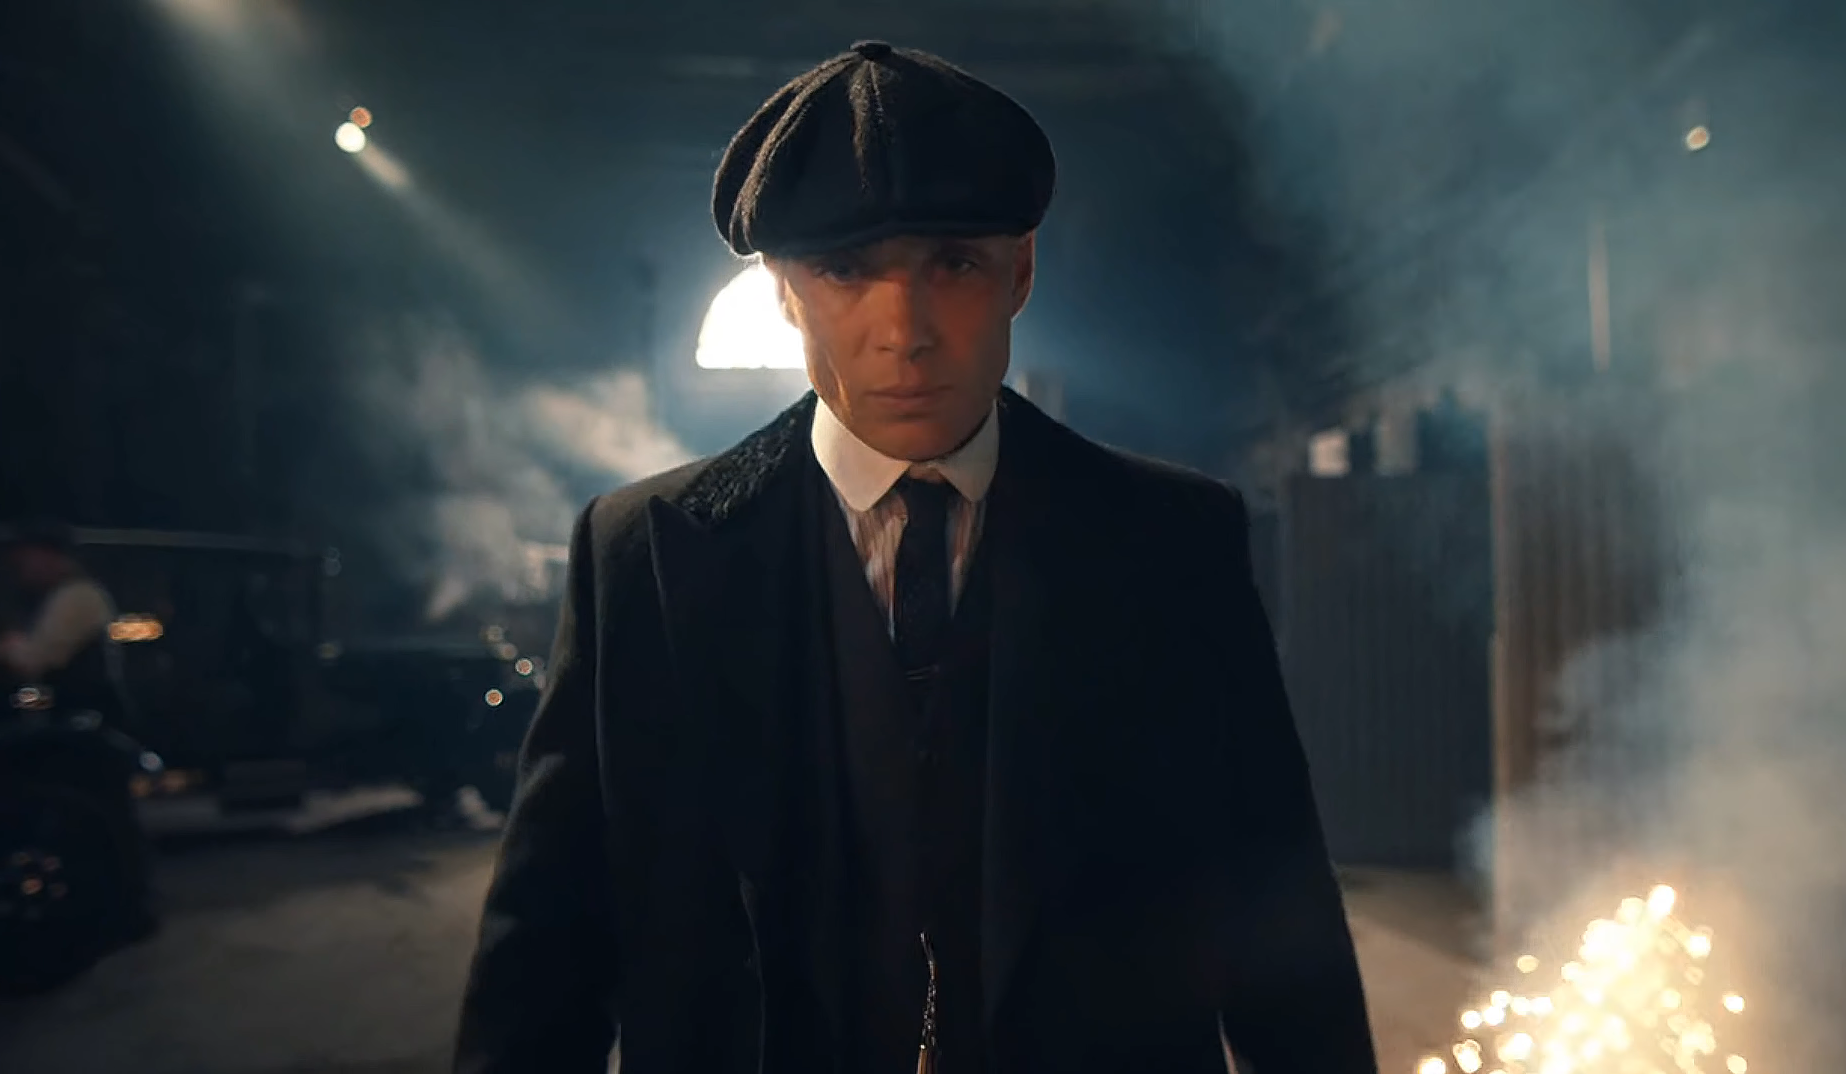 A hint of Stephen King's "The Shining" was found in the new season of "Peaky Blinders"